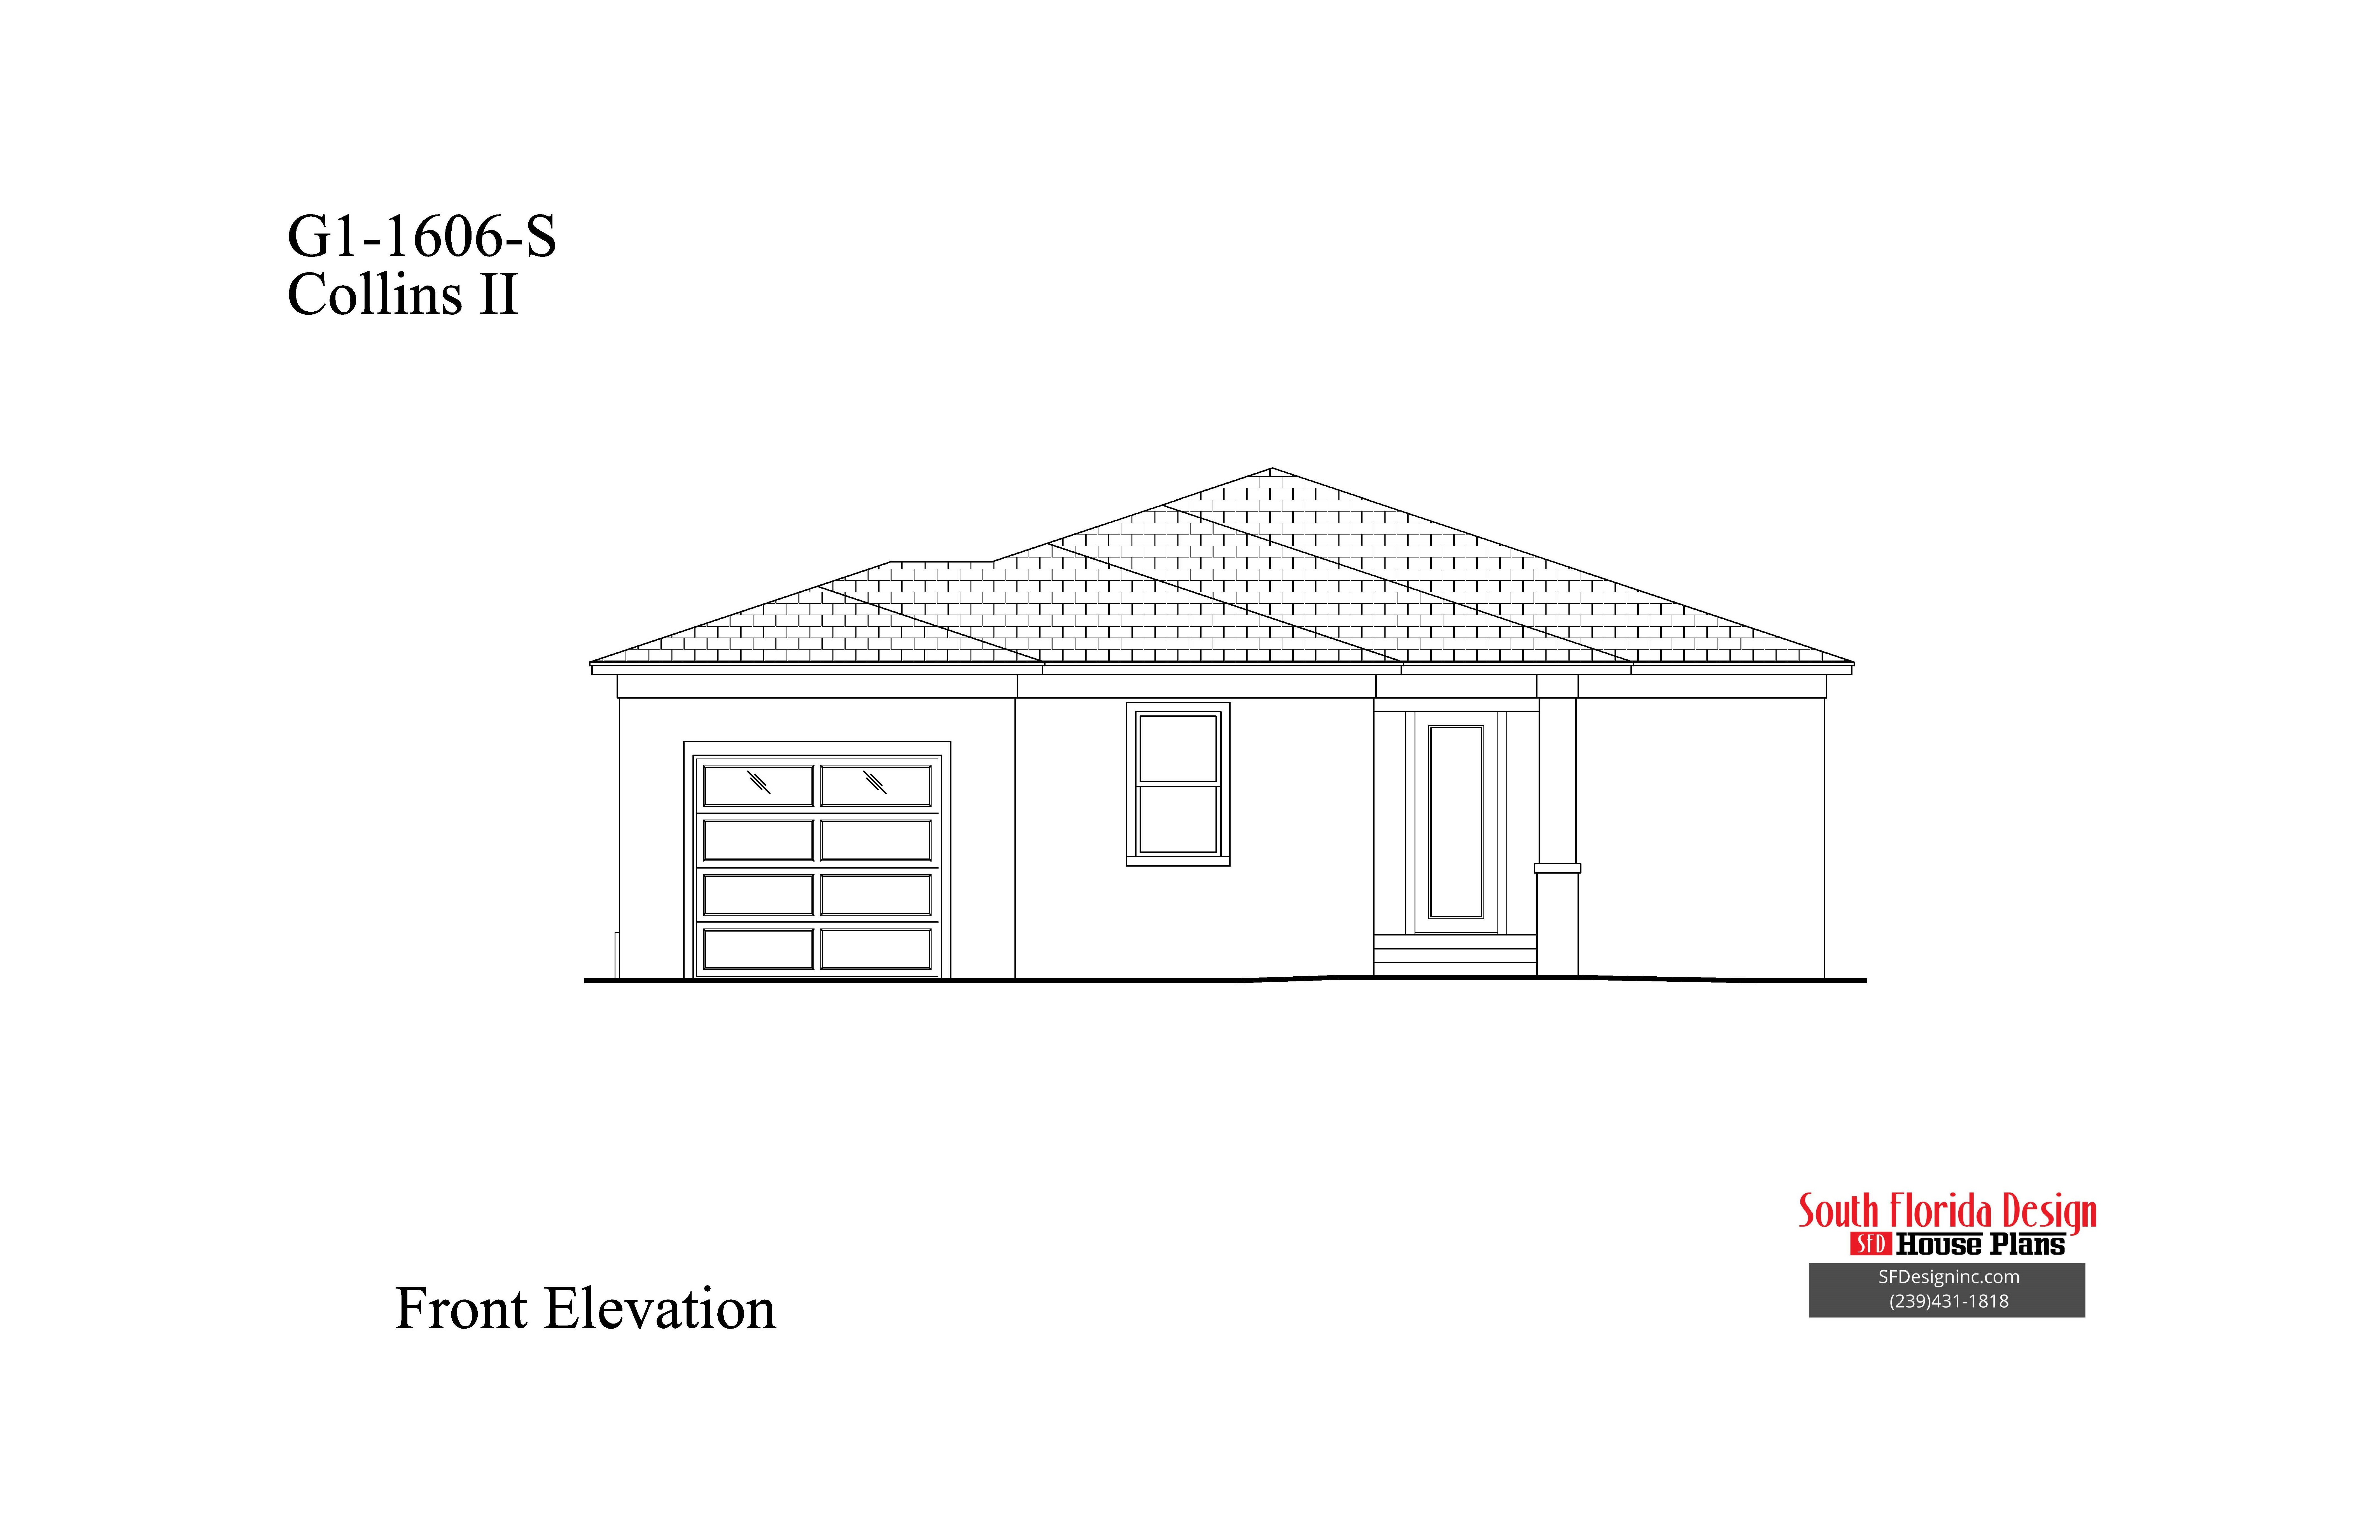 Black and white front elevation sketch of a 1606sf narrow lot house plan